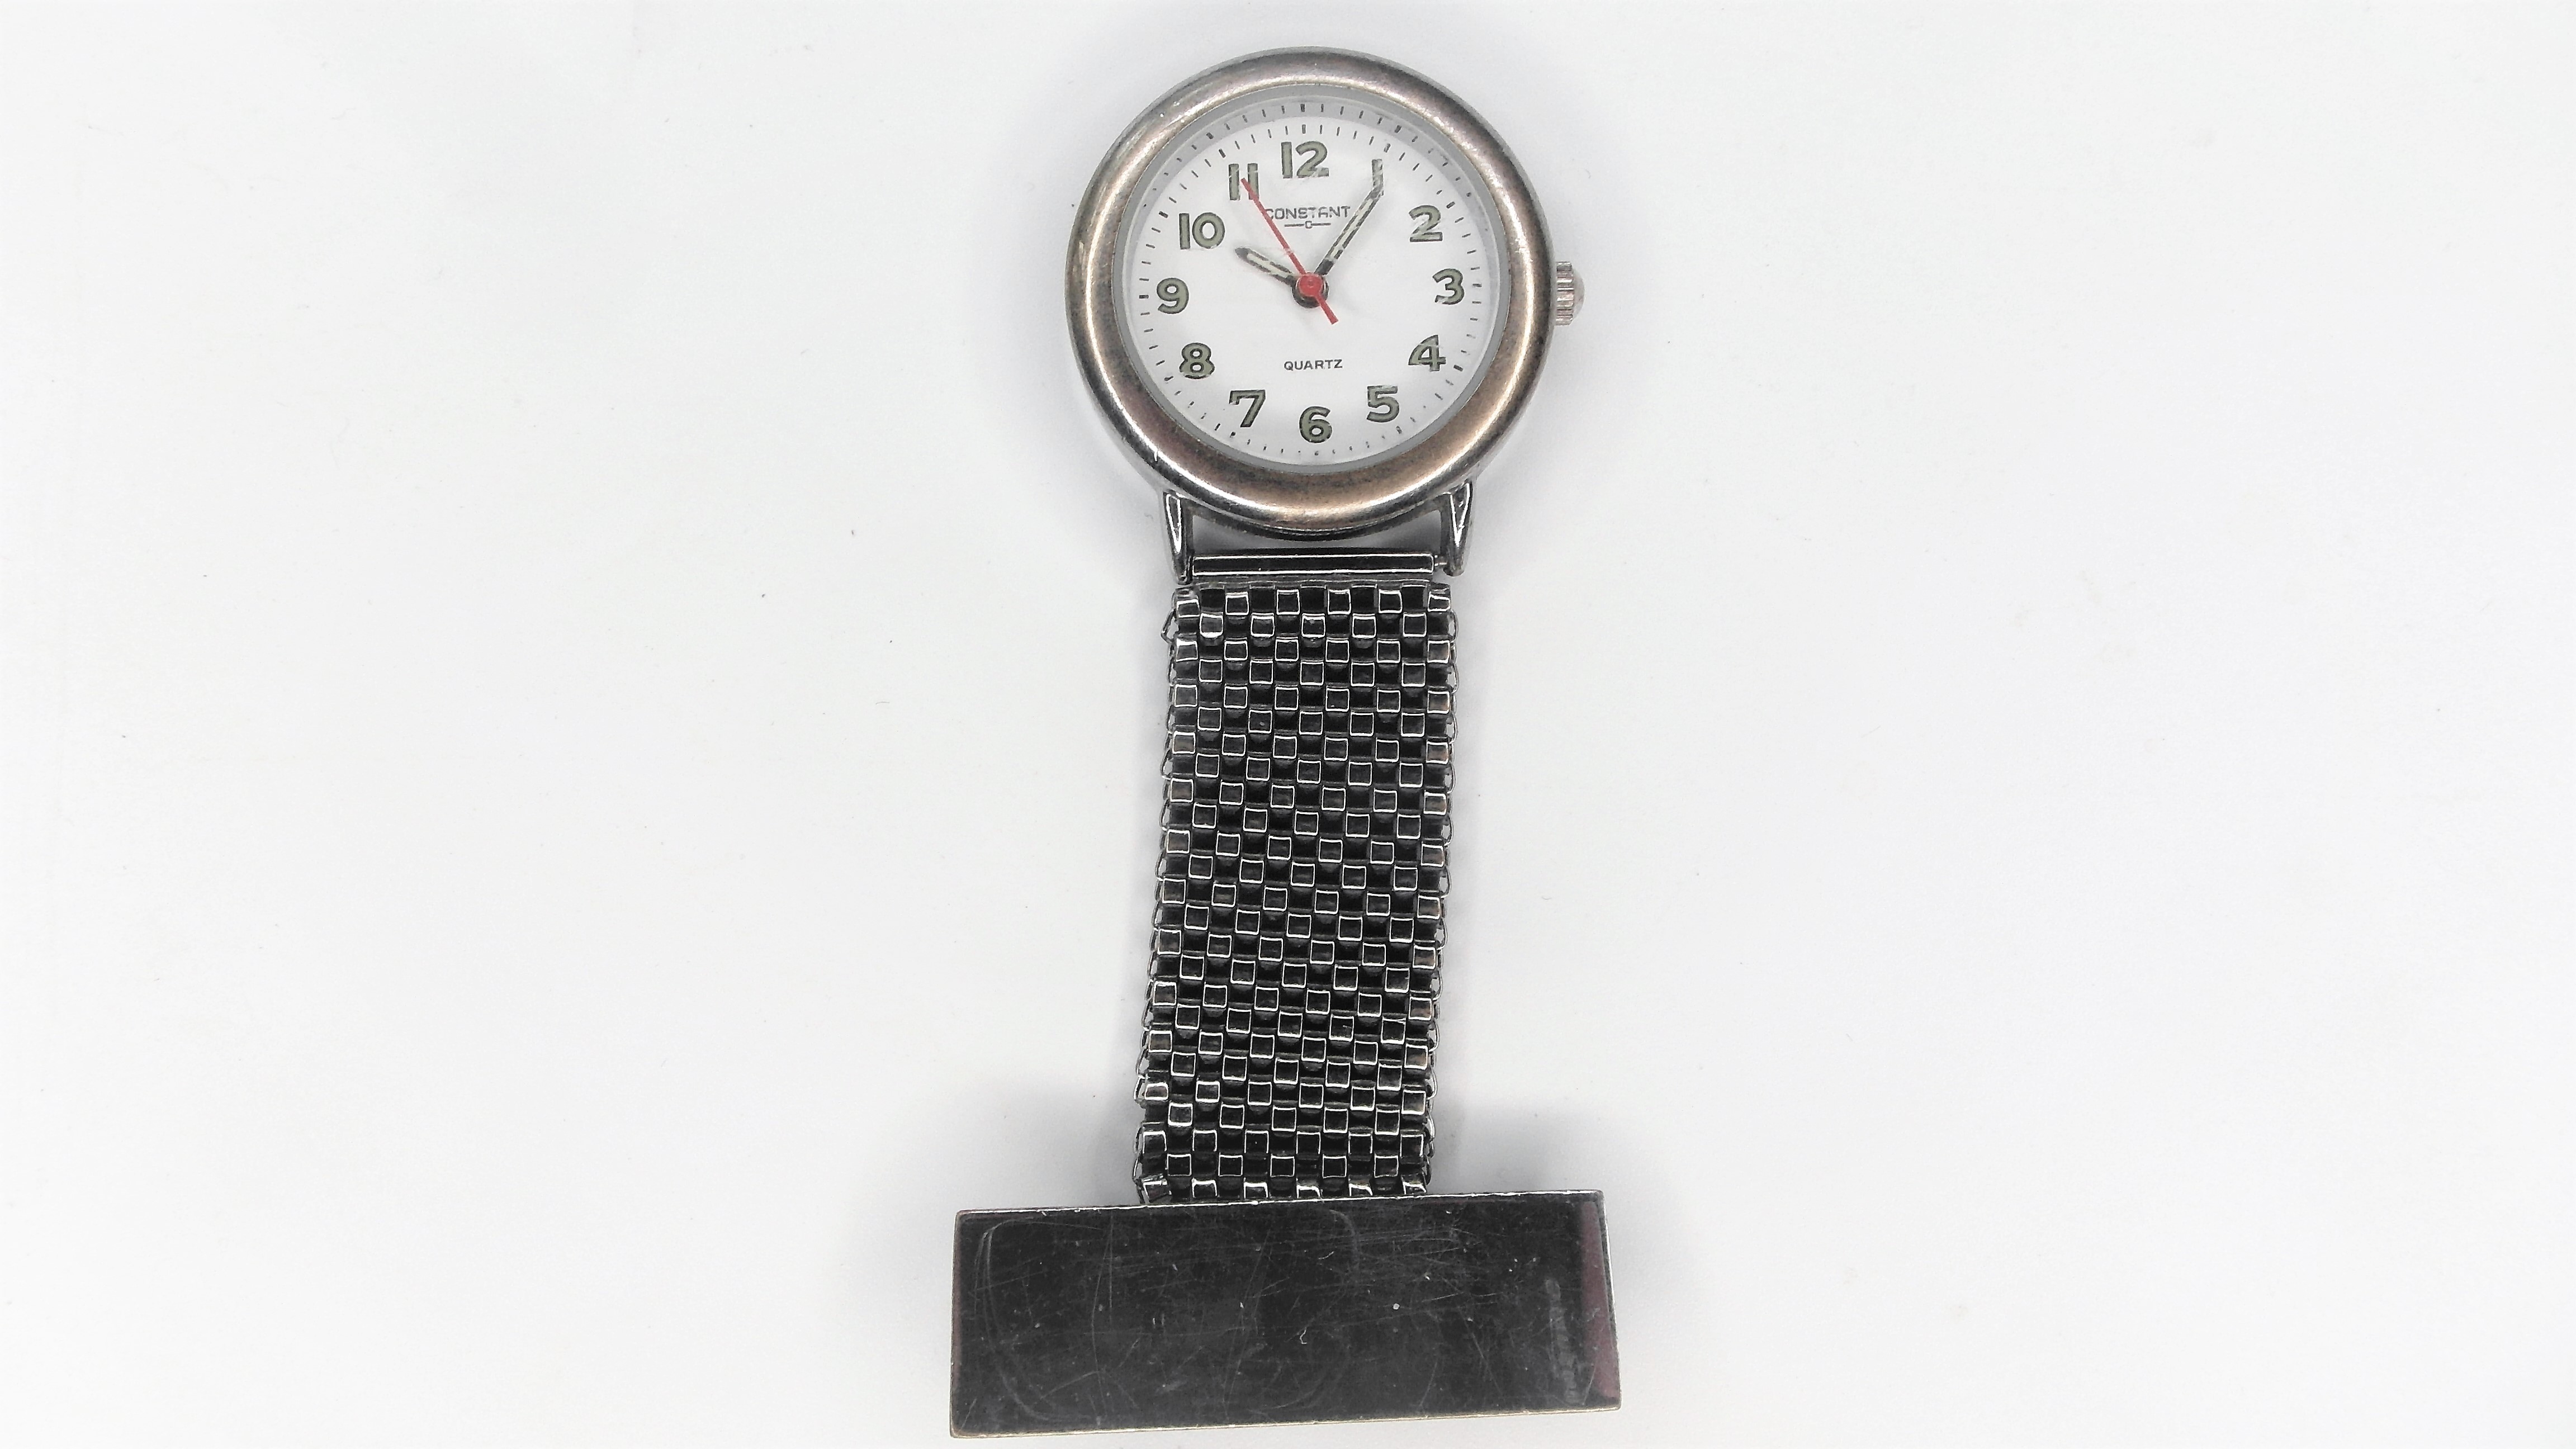 Ingersoll & Constant Nurse Fob Watches Ingersoll Nurse quartz Fob watch with pin/brooch - Image 5 of 5